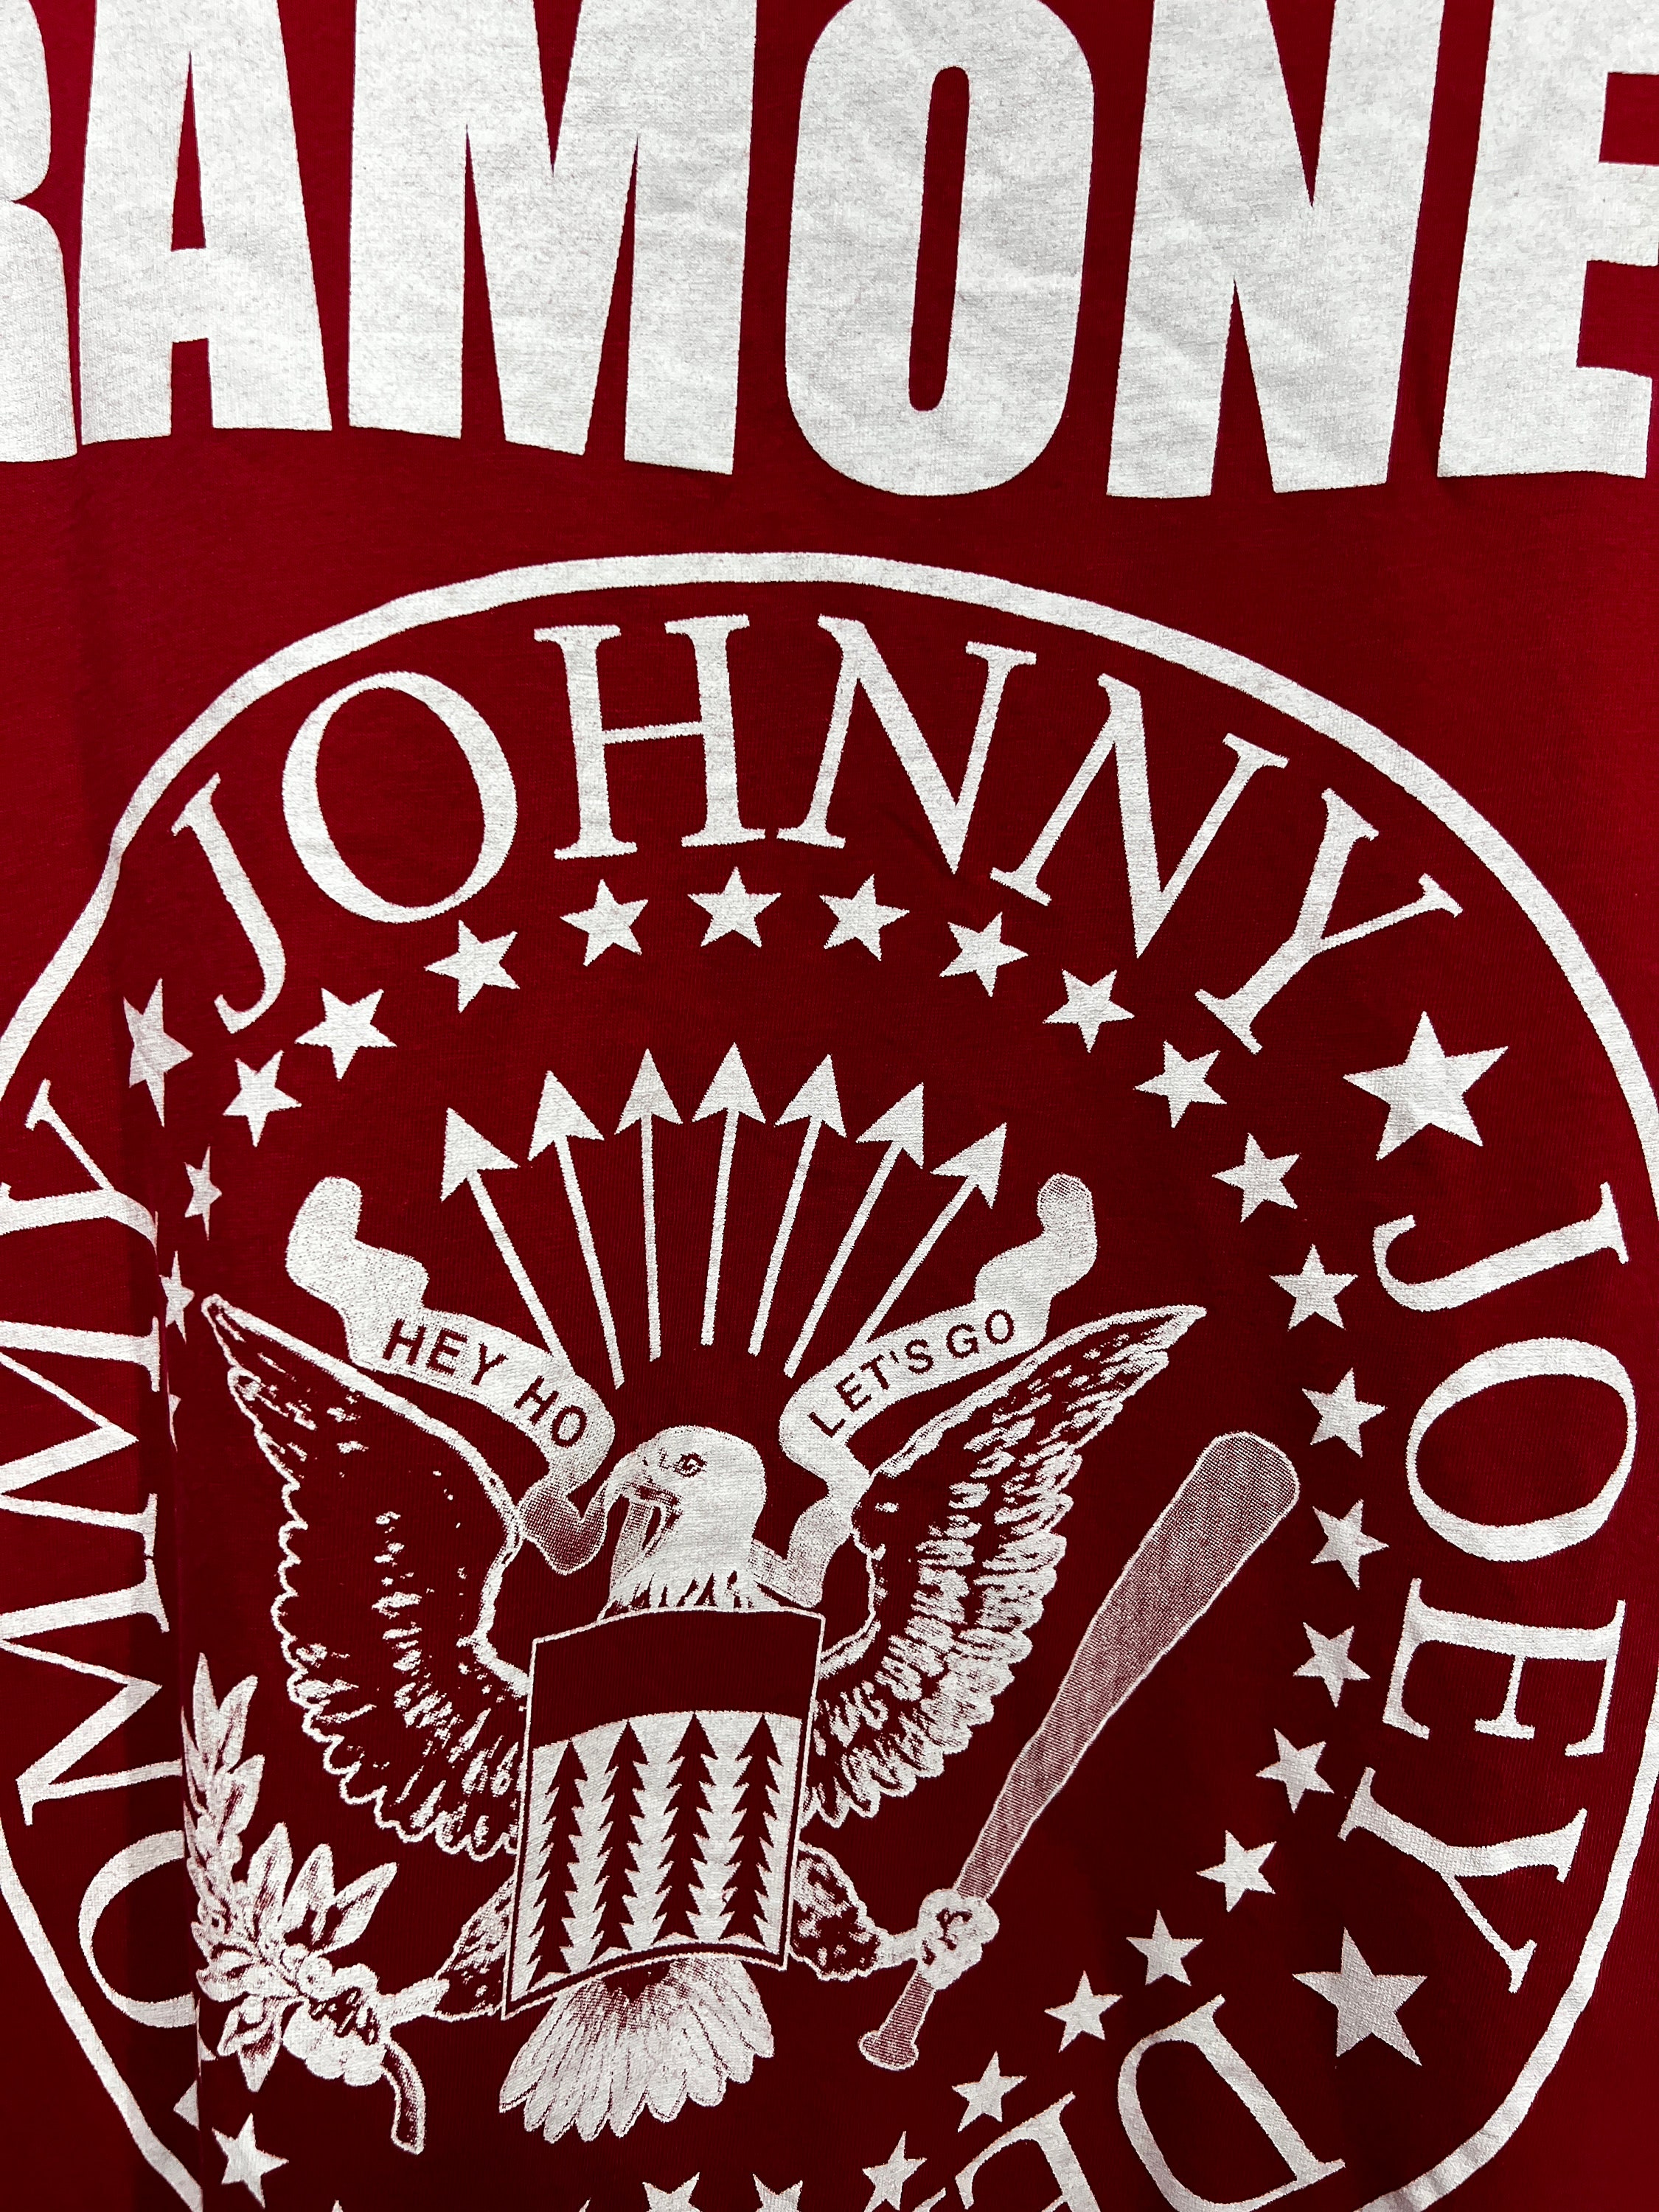 Discover Band Tee Ramones 2012 T shirt Size L